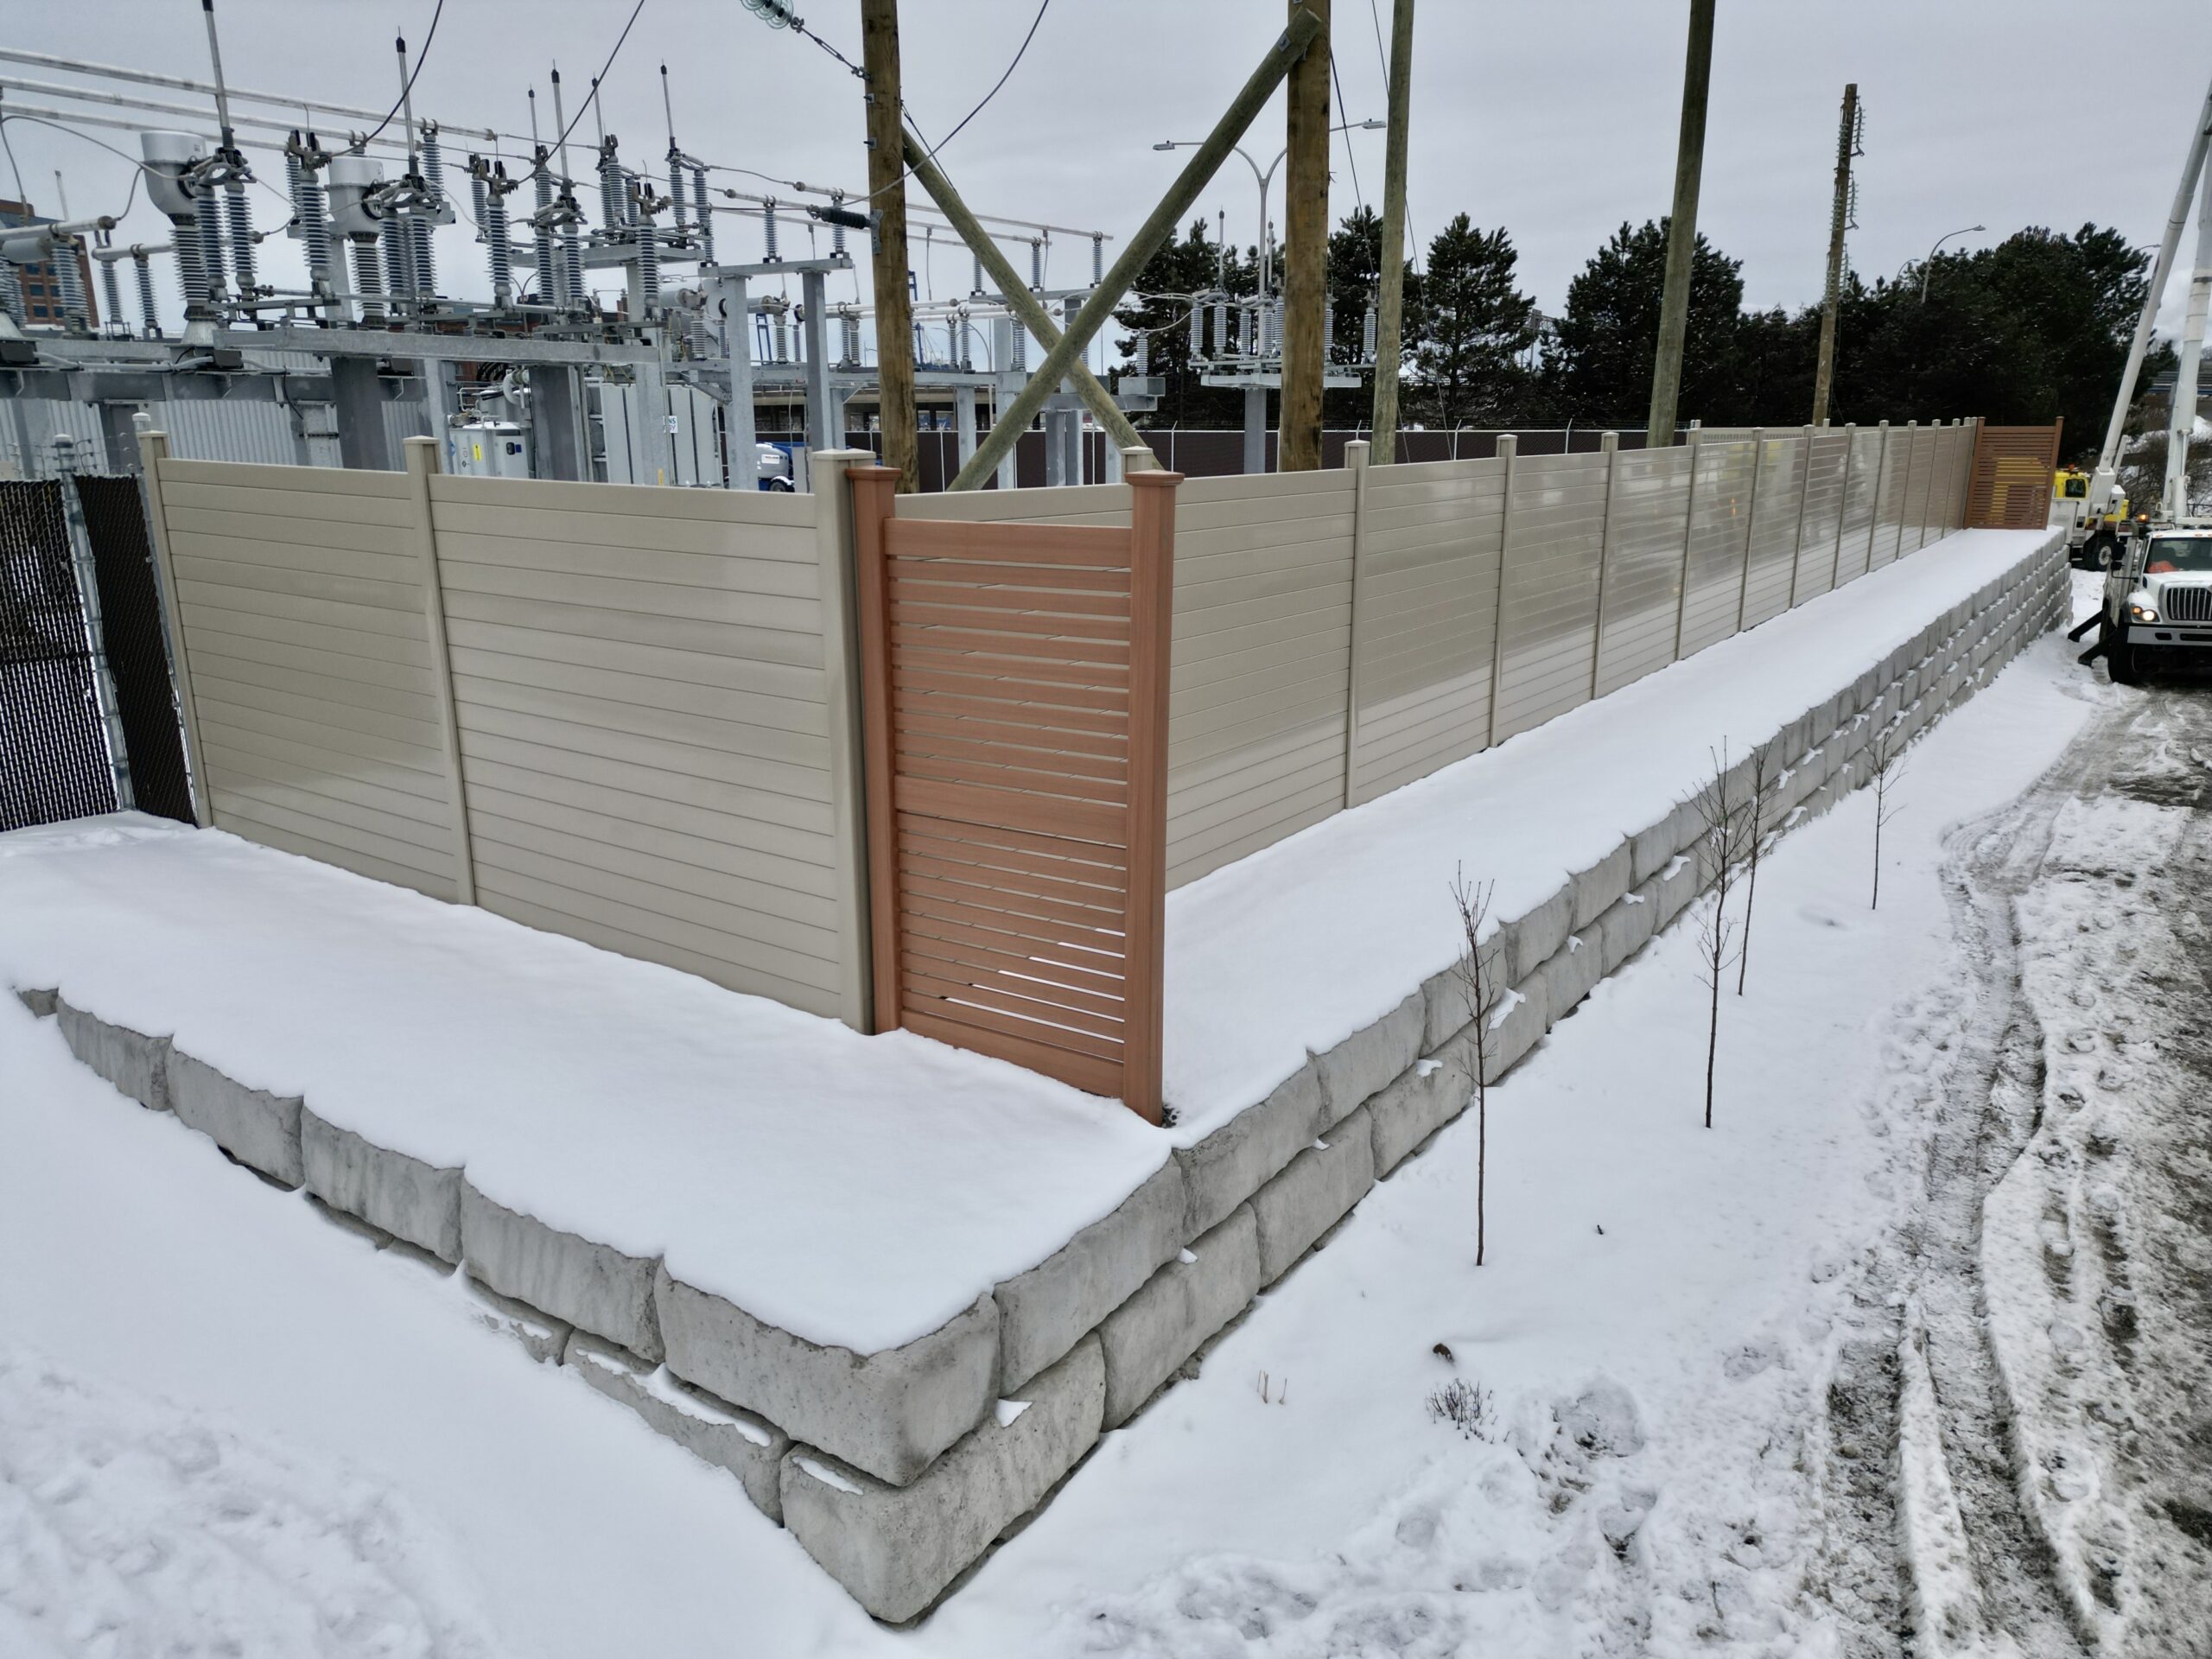 Closer view of electrical utility substation noise barrier wall